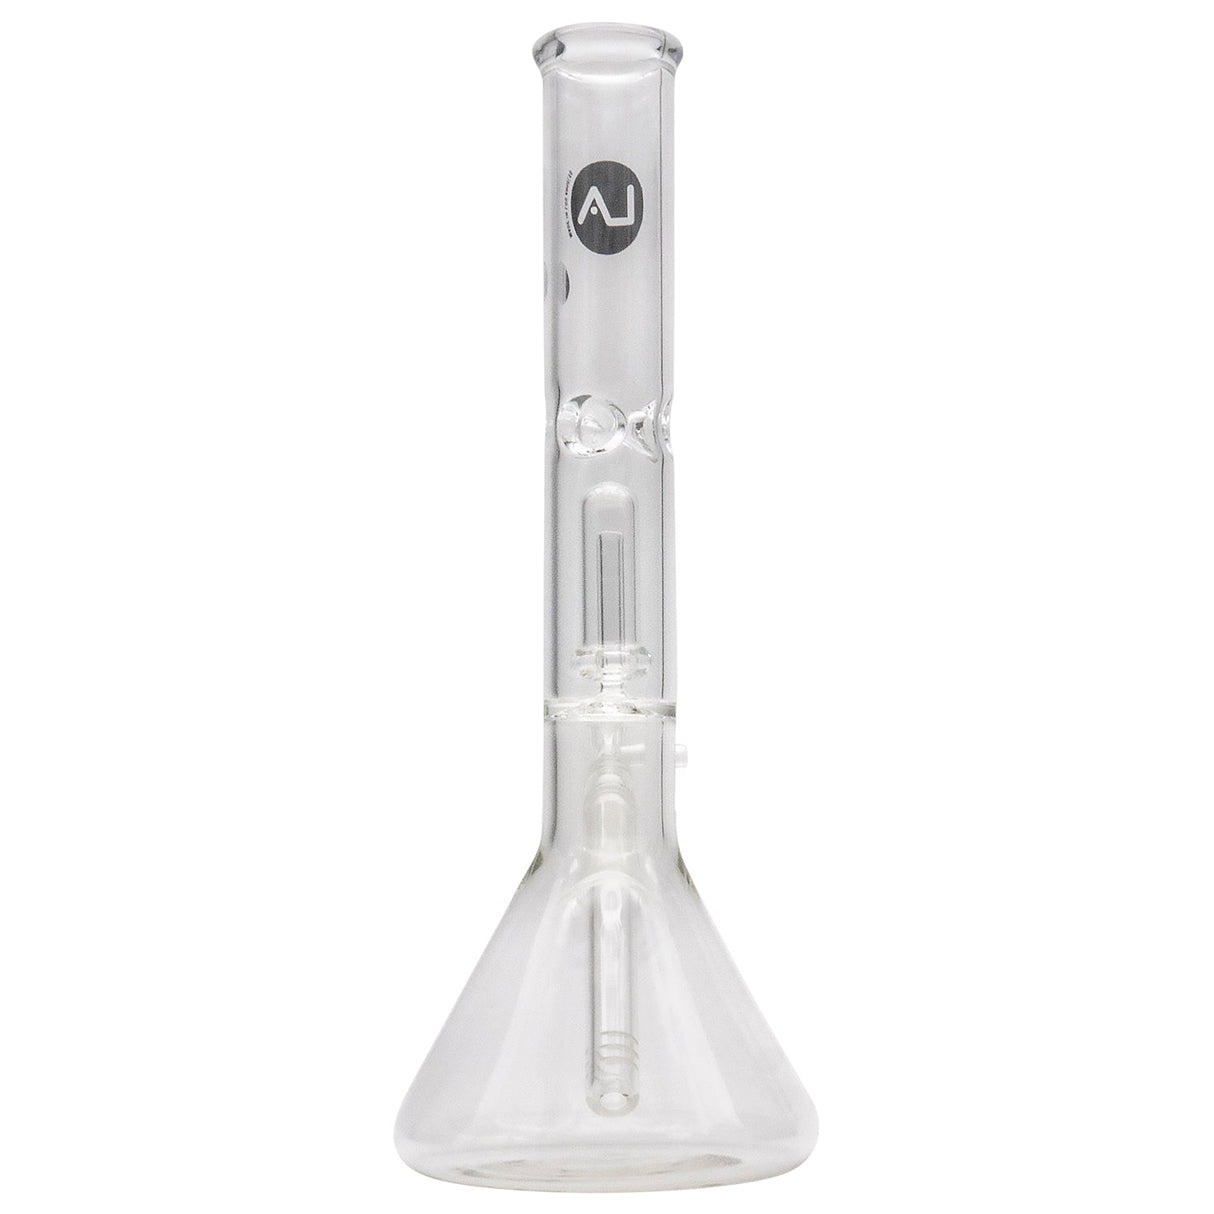 LA Pipes Beaker Bong with Single Showerhead Perc, Clear Borosilicate Glass, Front View